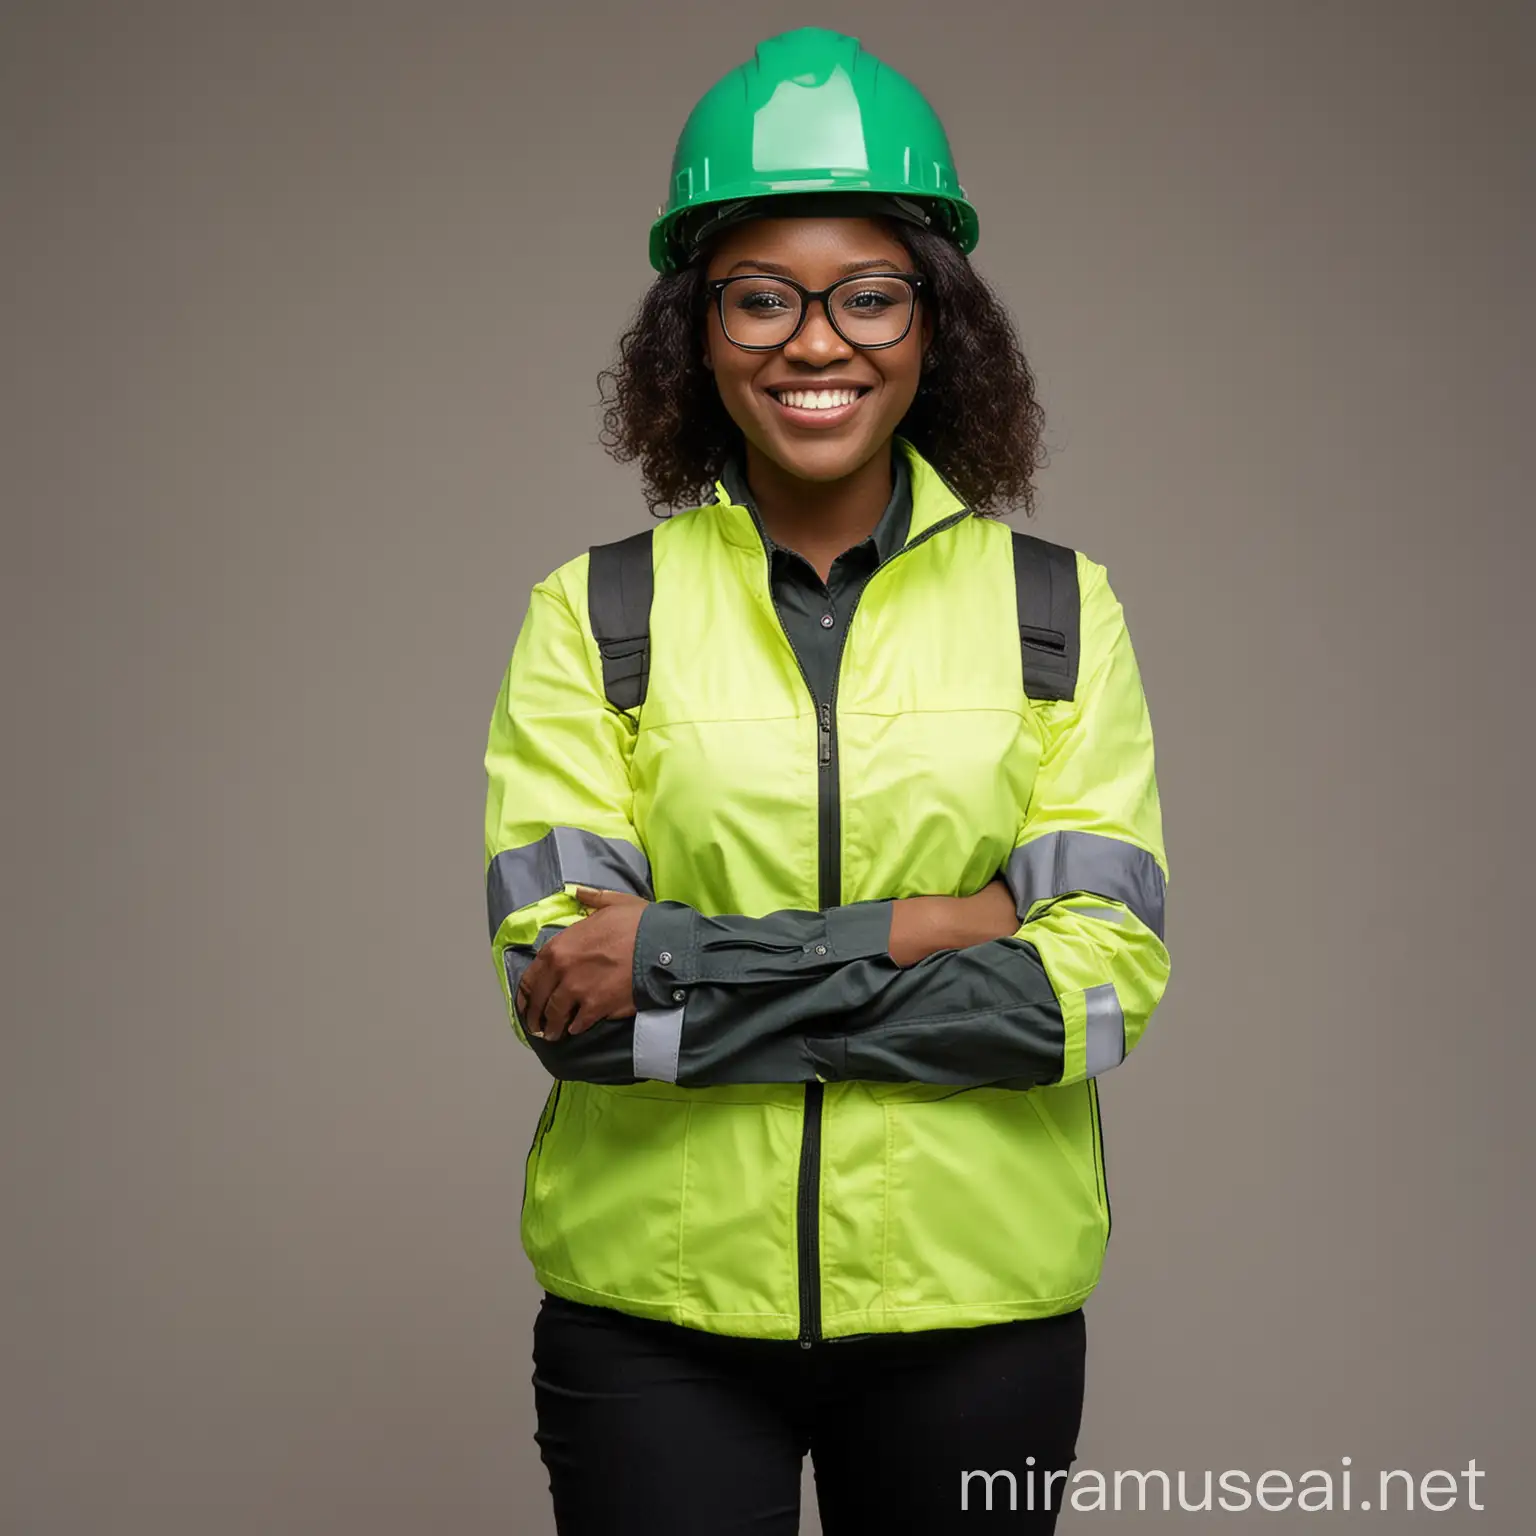 A NIGERIA lady in her late 20s wearing a green construction helmet and dark green safety jacket and a safety glasses, on a black trousers , folding her arms smiling, 